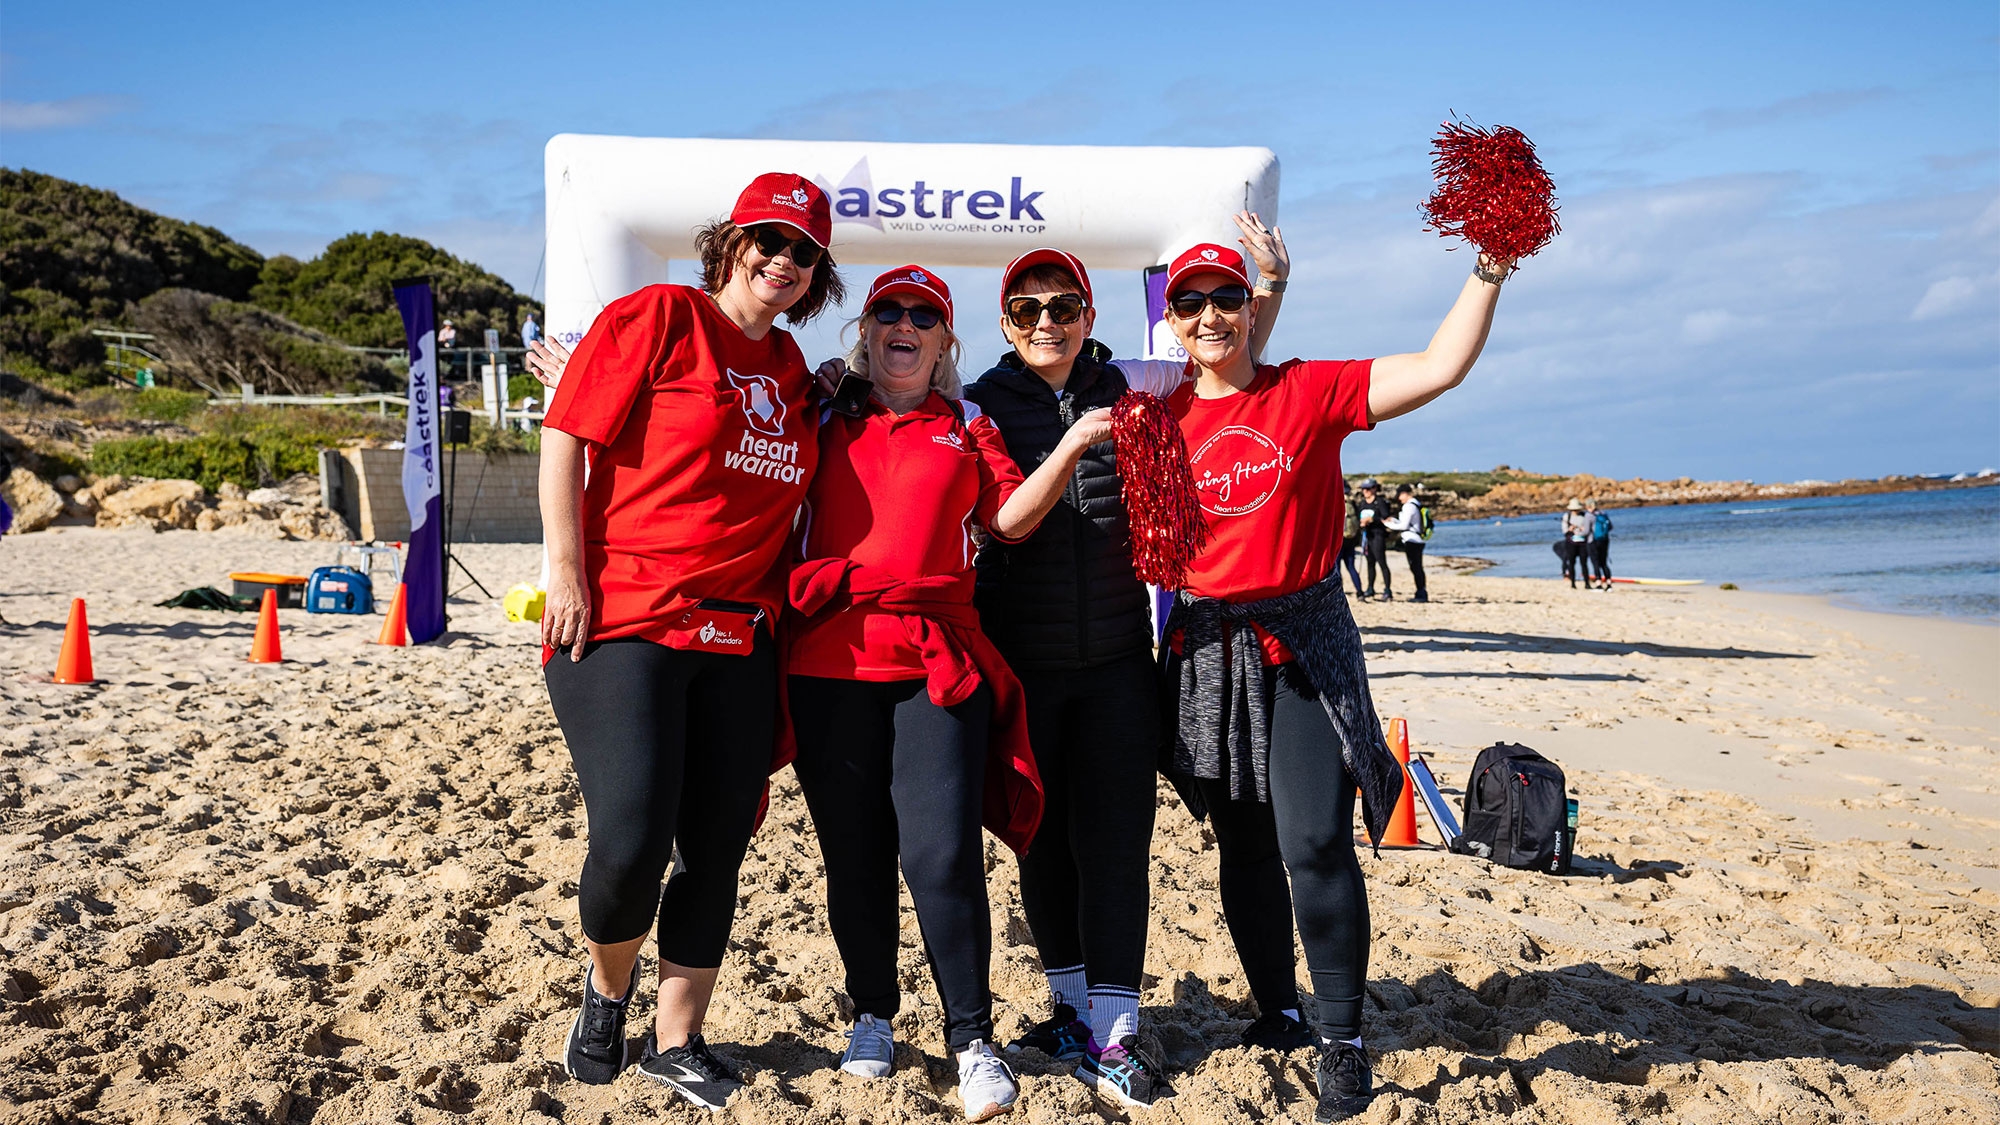 Heart Foundation team members smiling for a photo at a Coastrek event.